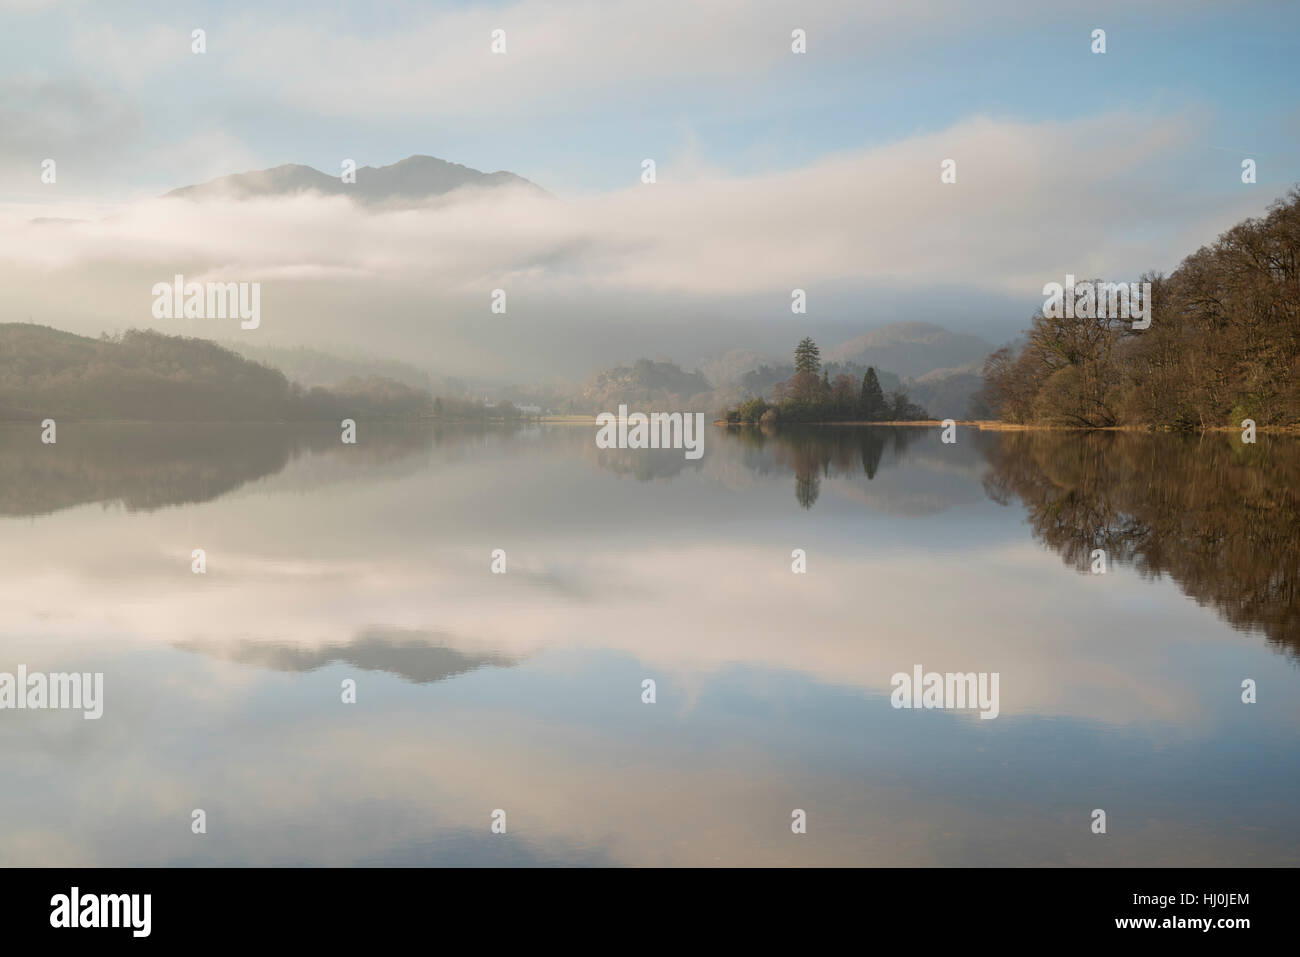 Stirlingshire, Scotland, UK. 21st January, 2017. Loch Achray in Loch Lomond and The Trossachs National Park, Scotland UK, Saturday 21st January 2017 UK weather: High pressure brings misty conditions to Loch Achray with Ben Venue mountain emerging from the clouds. Credit: Aidan Maccormick/Alamy Live News. Stock Photo